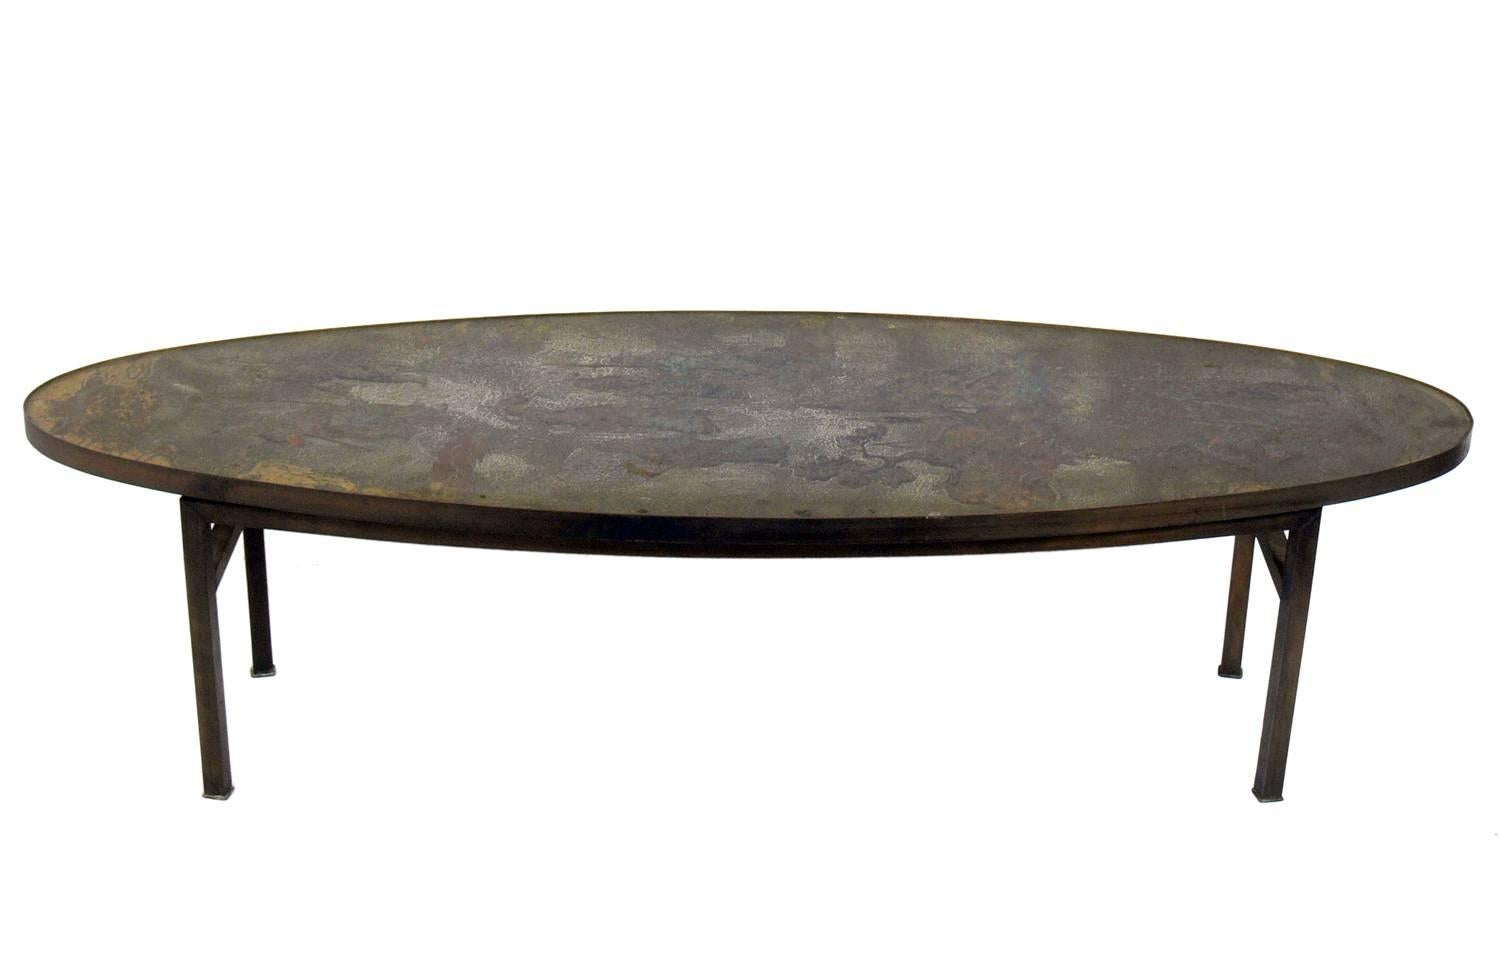 Asian inspired coffee table, made by Phillip and Kelvin Laverne, American, circa 1960s. Long surfboard shape with richly patinated Asian inspired decorations to the tabletop.